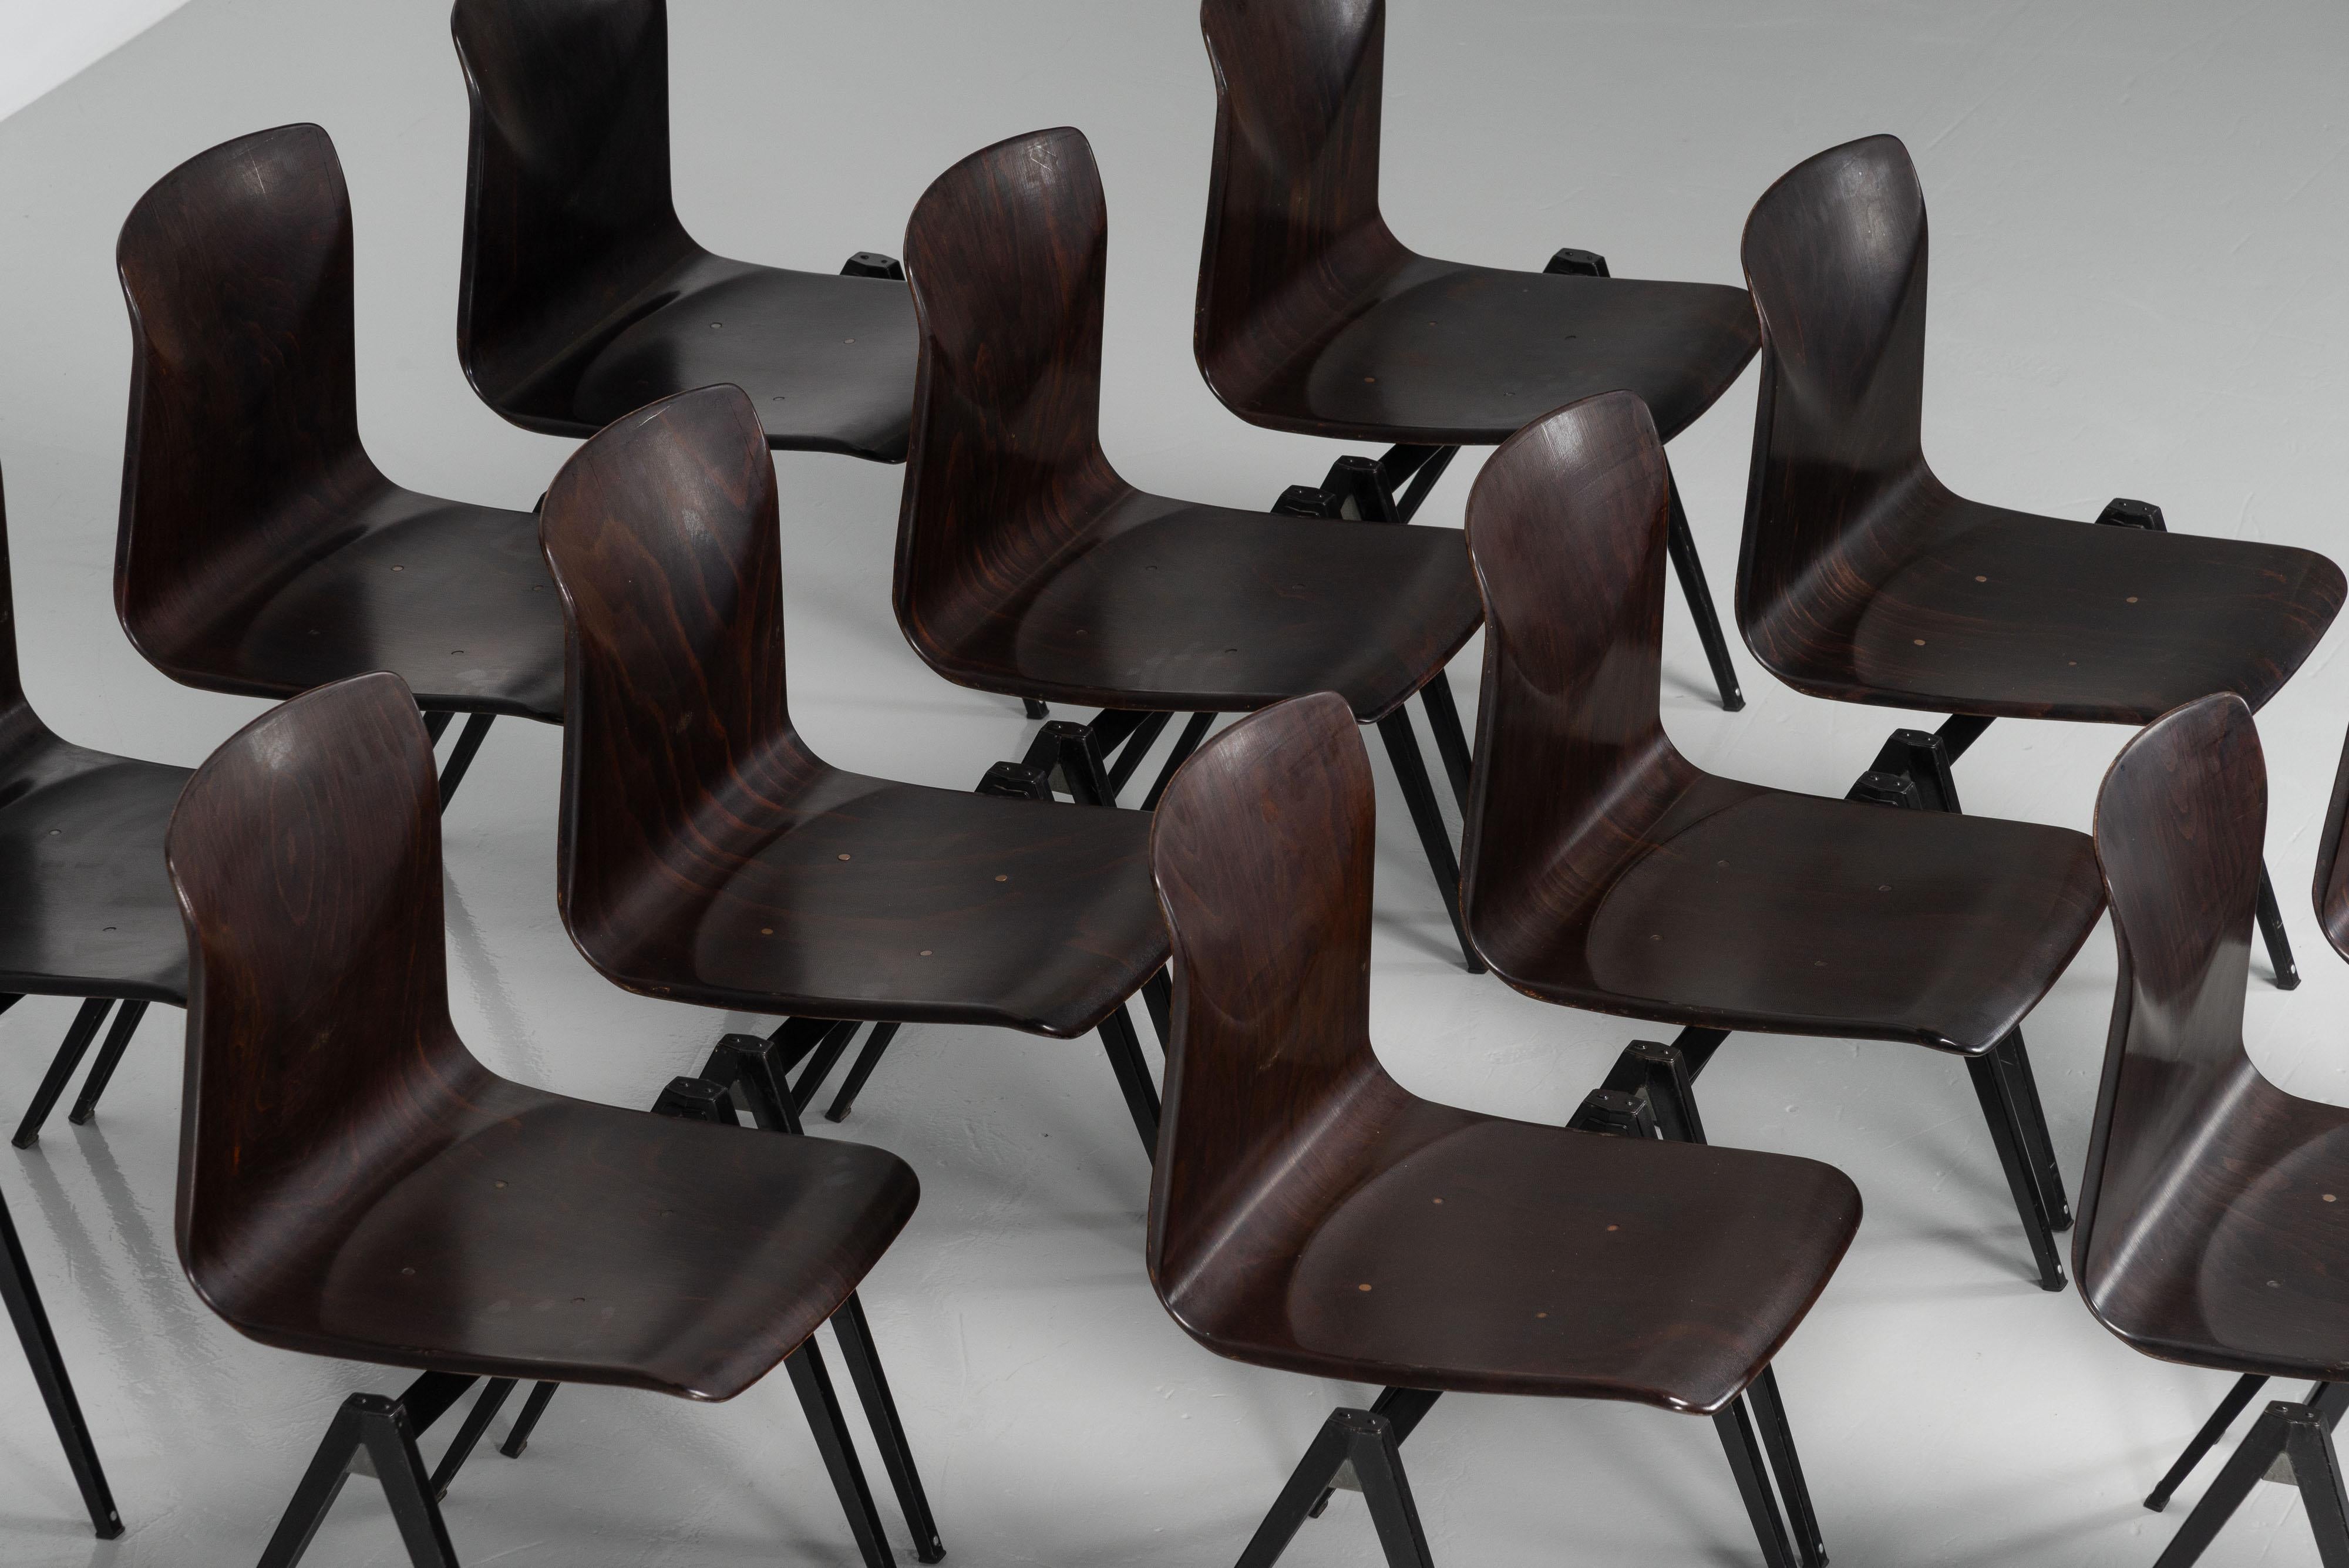 Nice large set of S22 stacking chairs designed by Elmar Flototto and manufactured by Pagholz in Germany in 1970. They're very well designed to be stacked on top of each other and interlocked next to each other. These chairs are designed really well